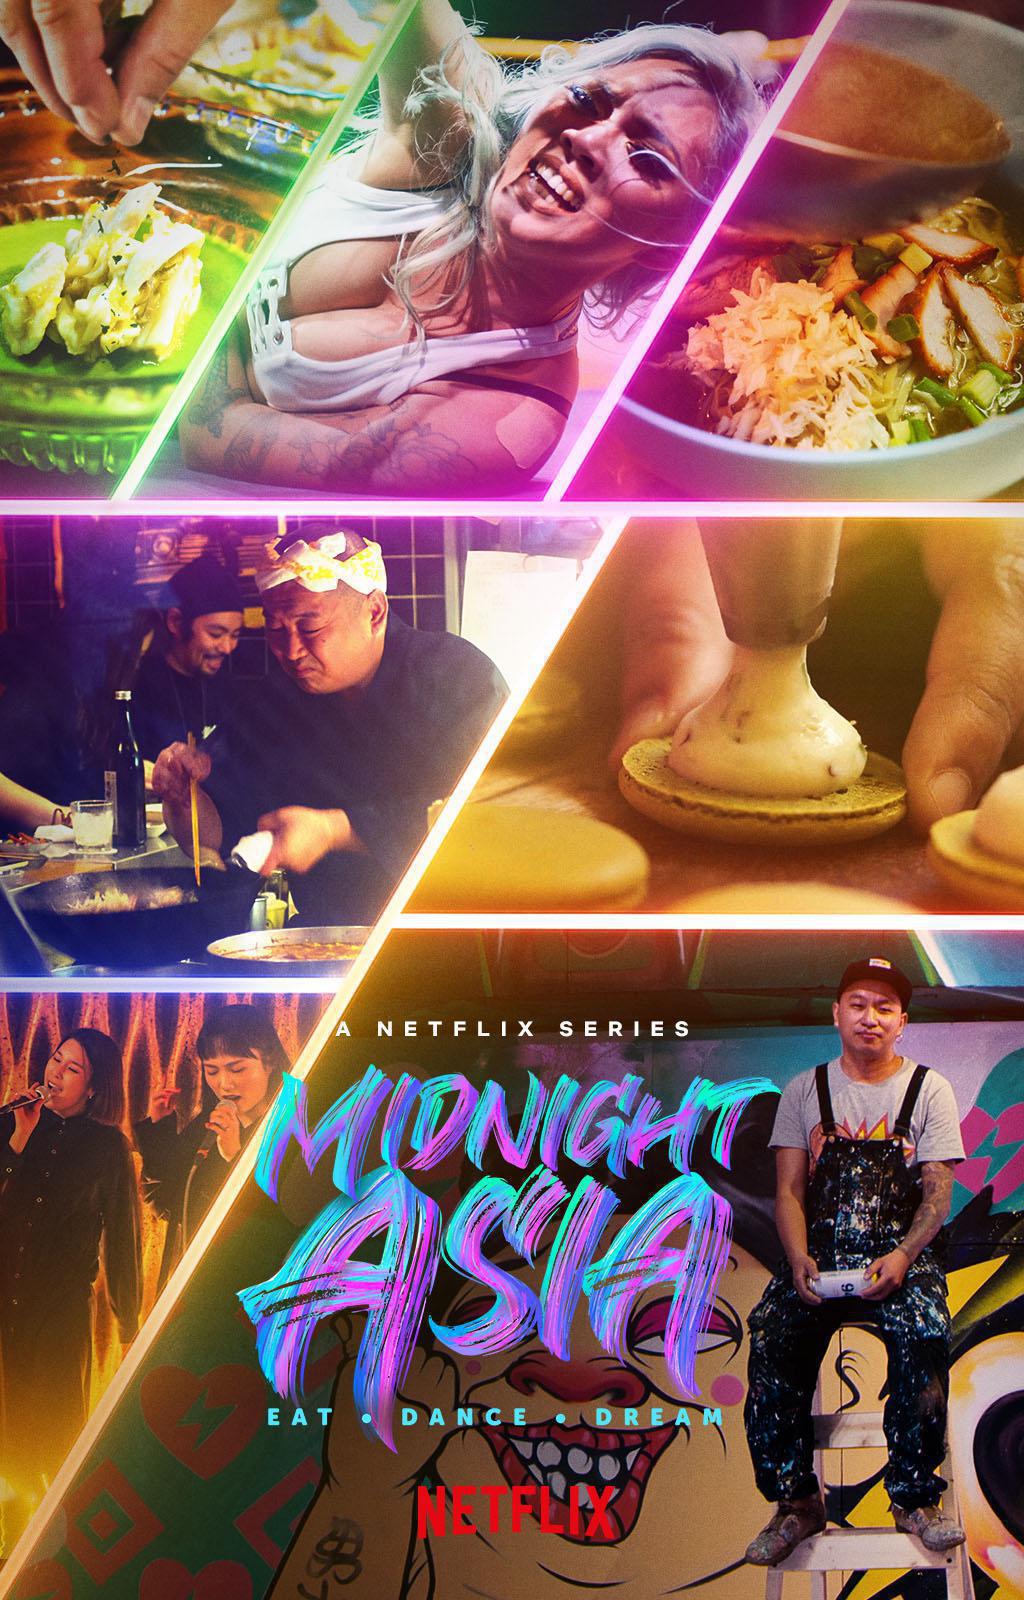 TV ratings for Midnight Asia: Eat Dance Dream in Tailandia. Netflix TV series